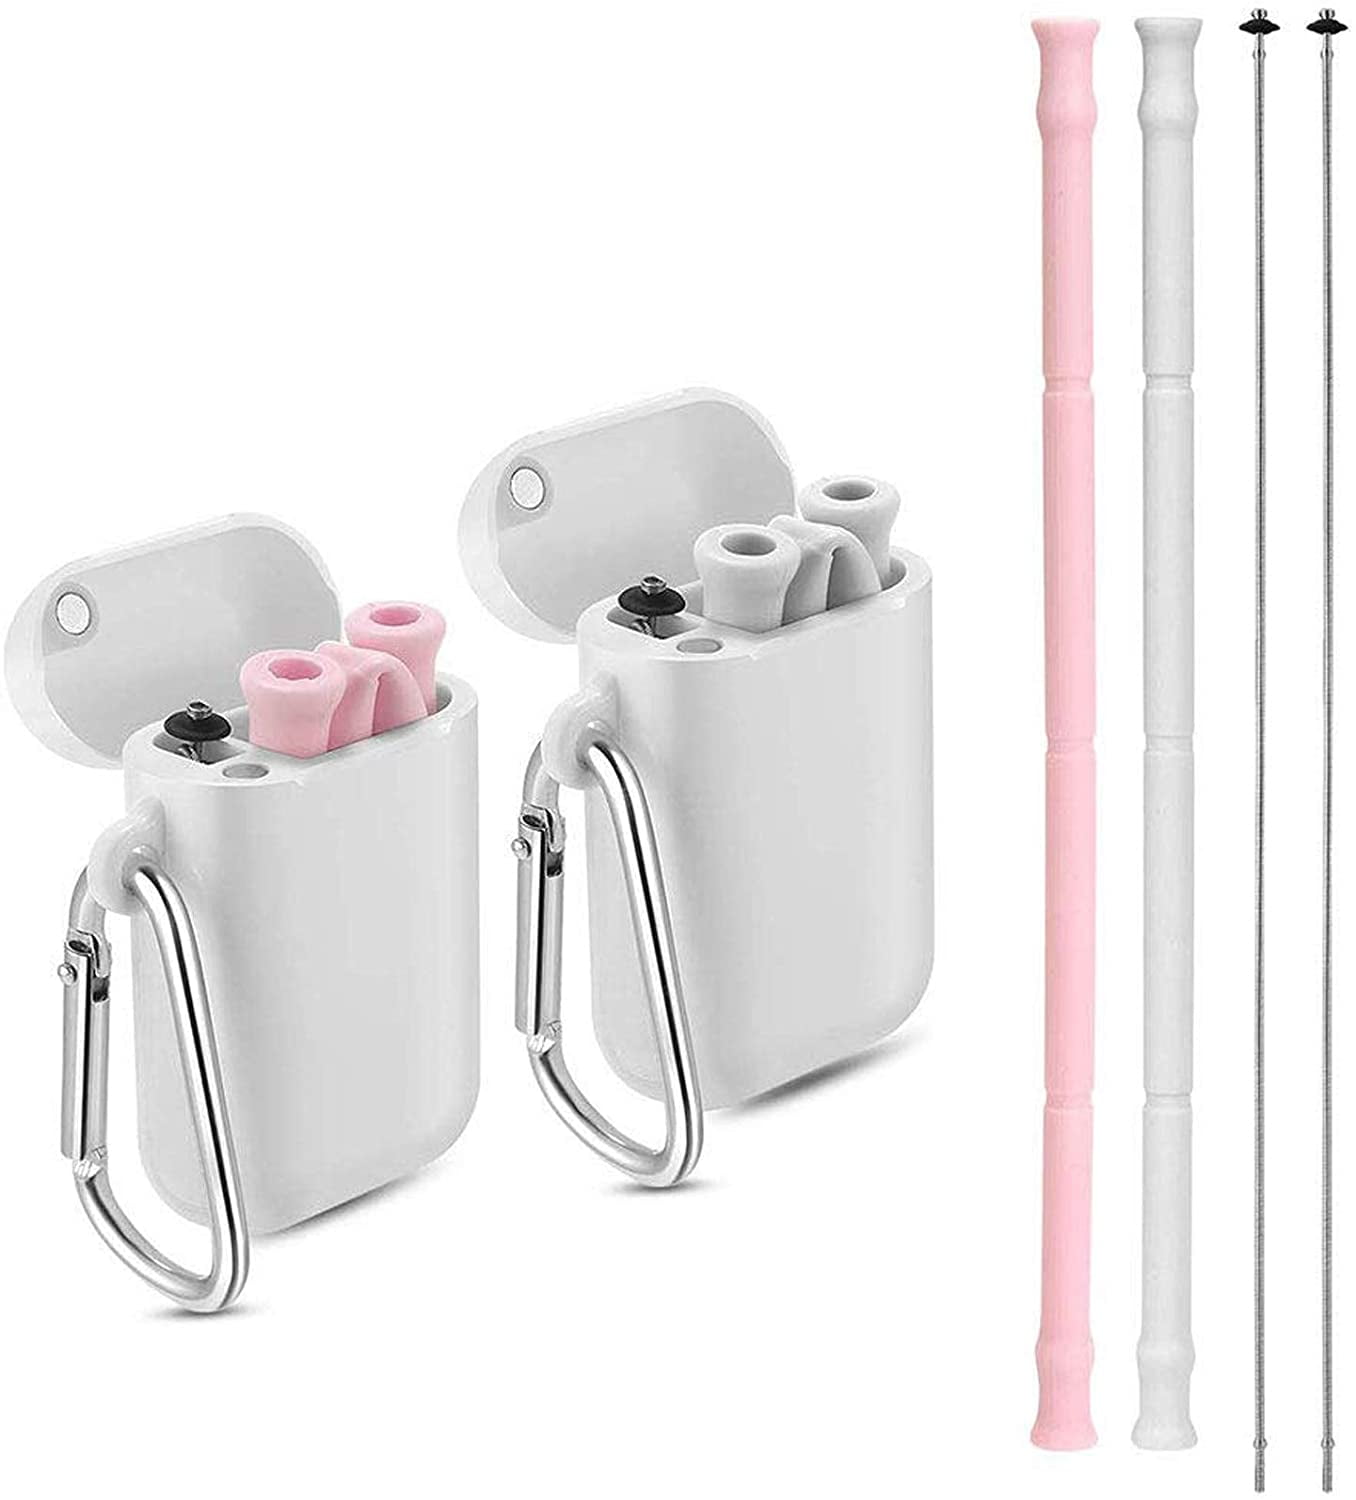 2 Pack Cleaning Brush Vantic Portable Reusable Metal Straws- Telescopic Stainless Steel Travel Metal Straw with Carrying Case & Silicone Flex Tip Pink & Gray 